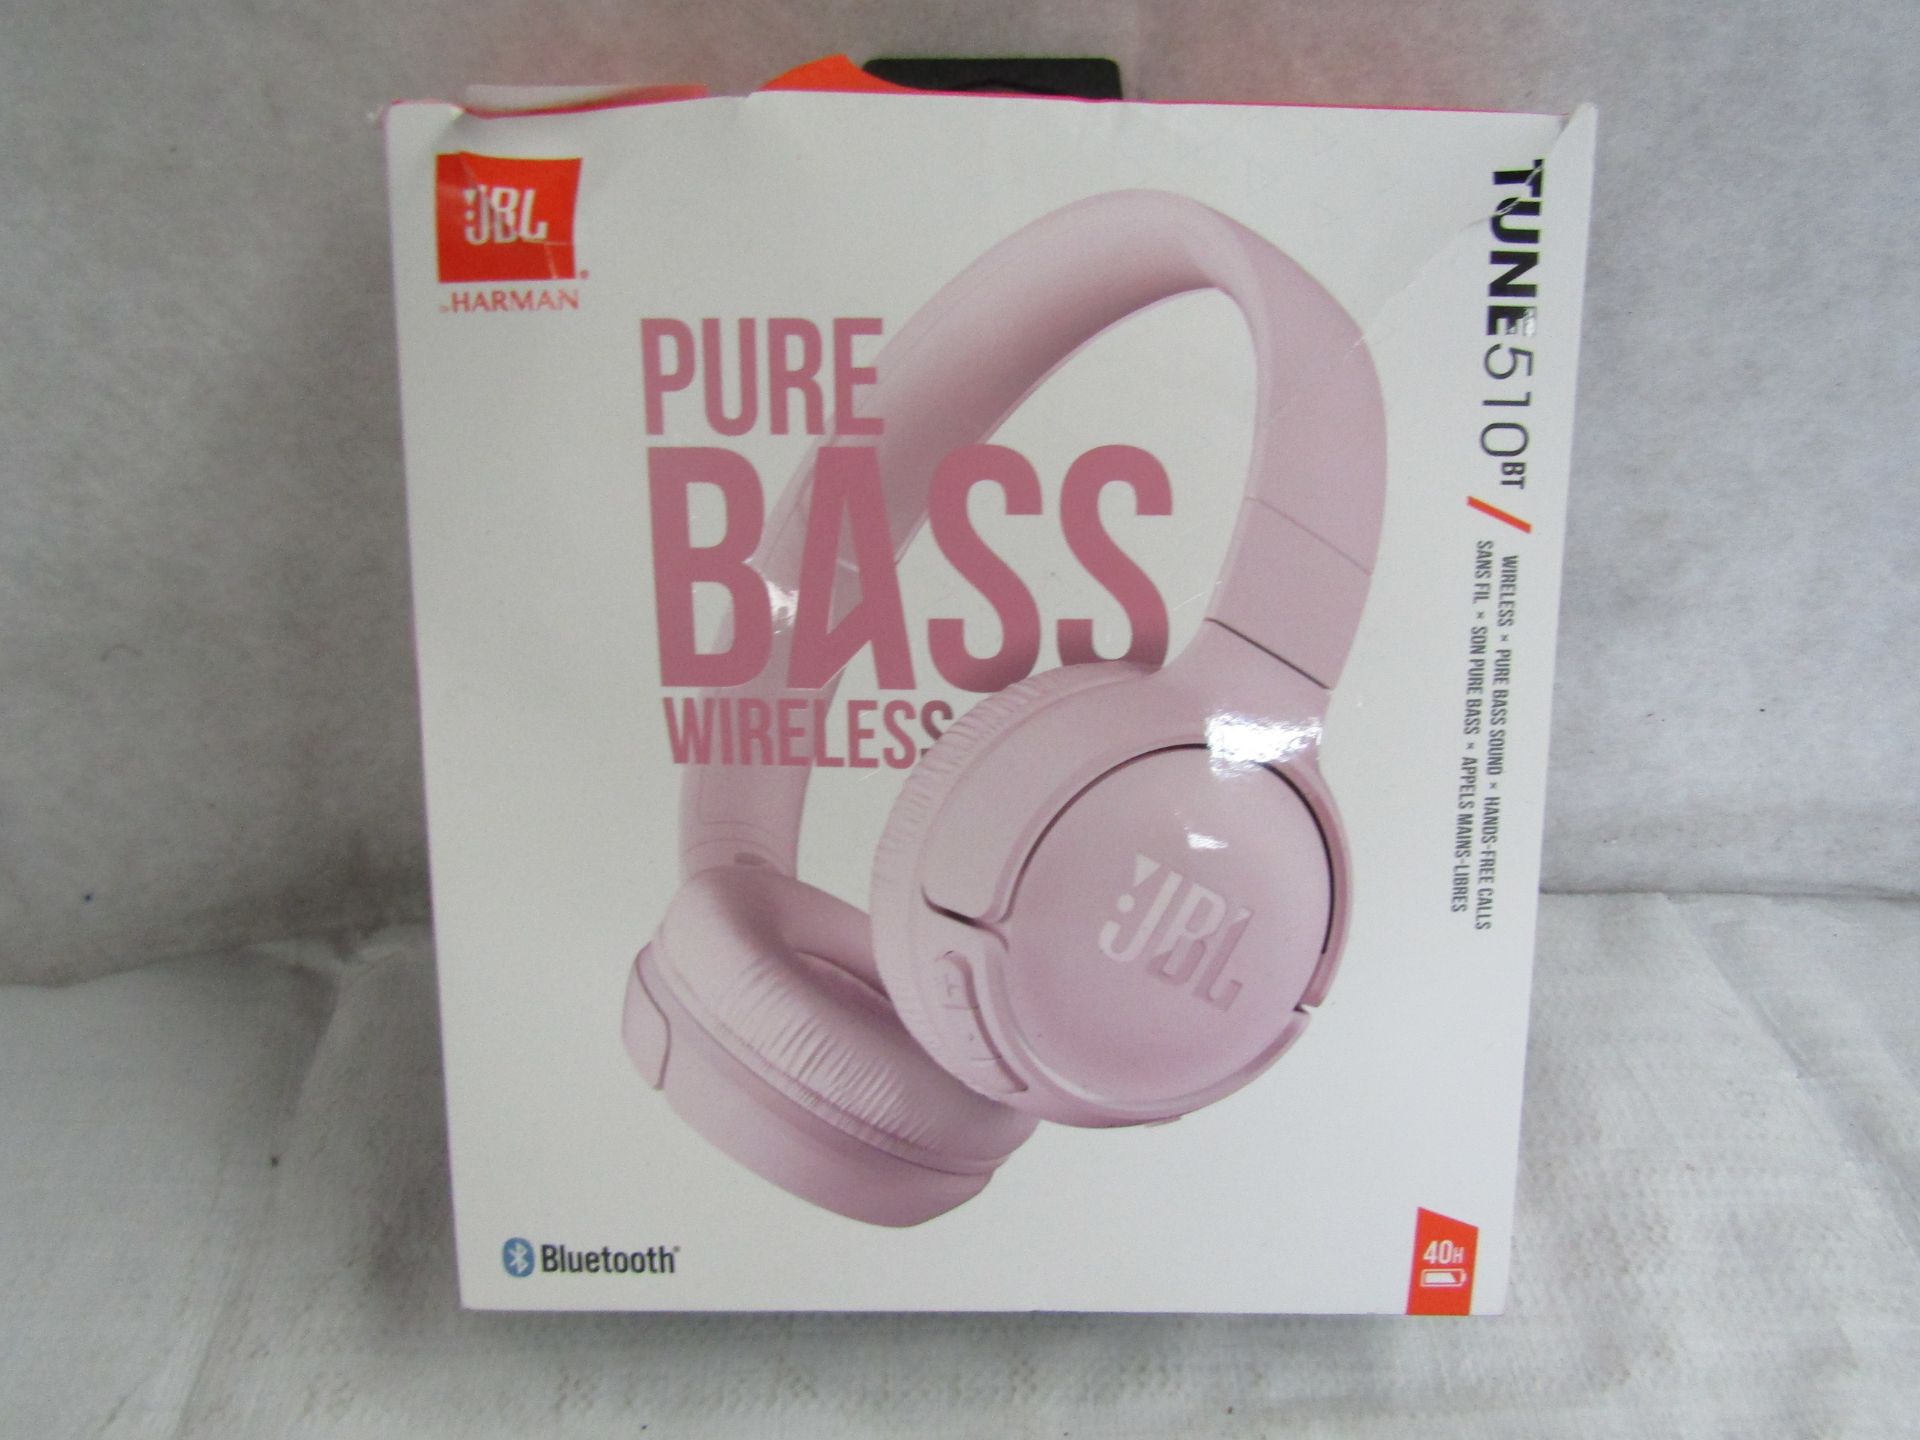 Jbl Pure Bass Wireless Headphones, Unchecked & Boxed. RRP £28